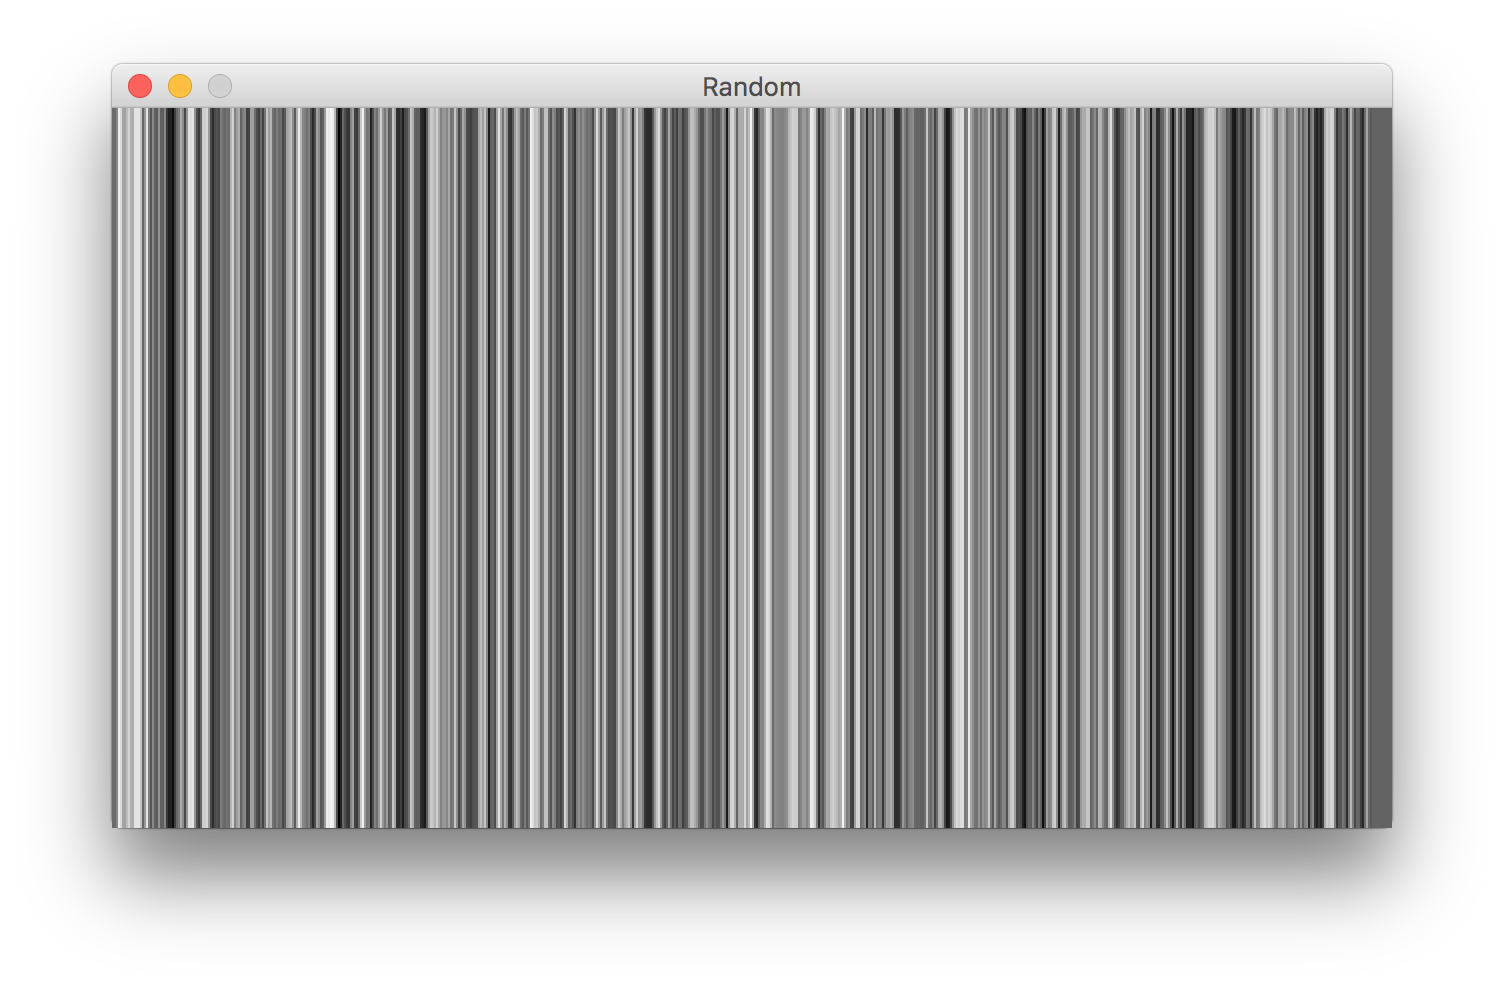 a series of black vertical lines on a white field of varying width